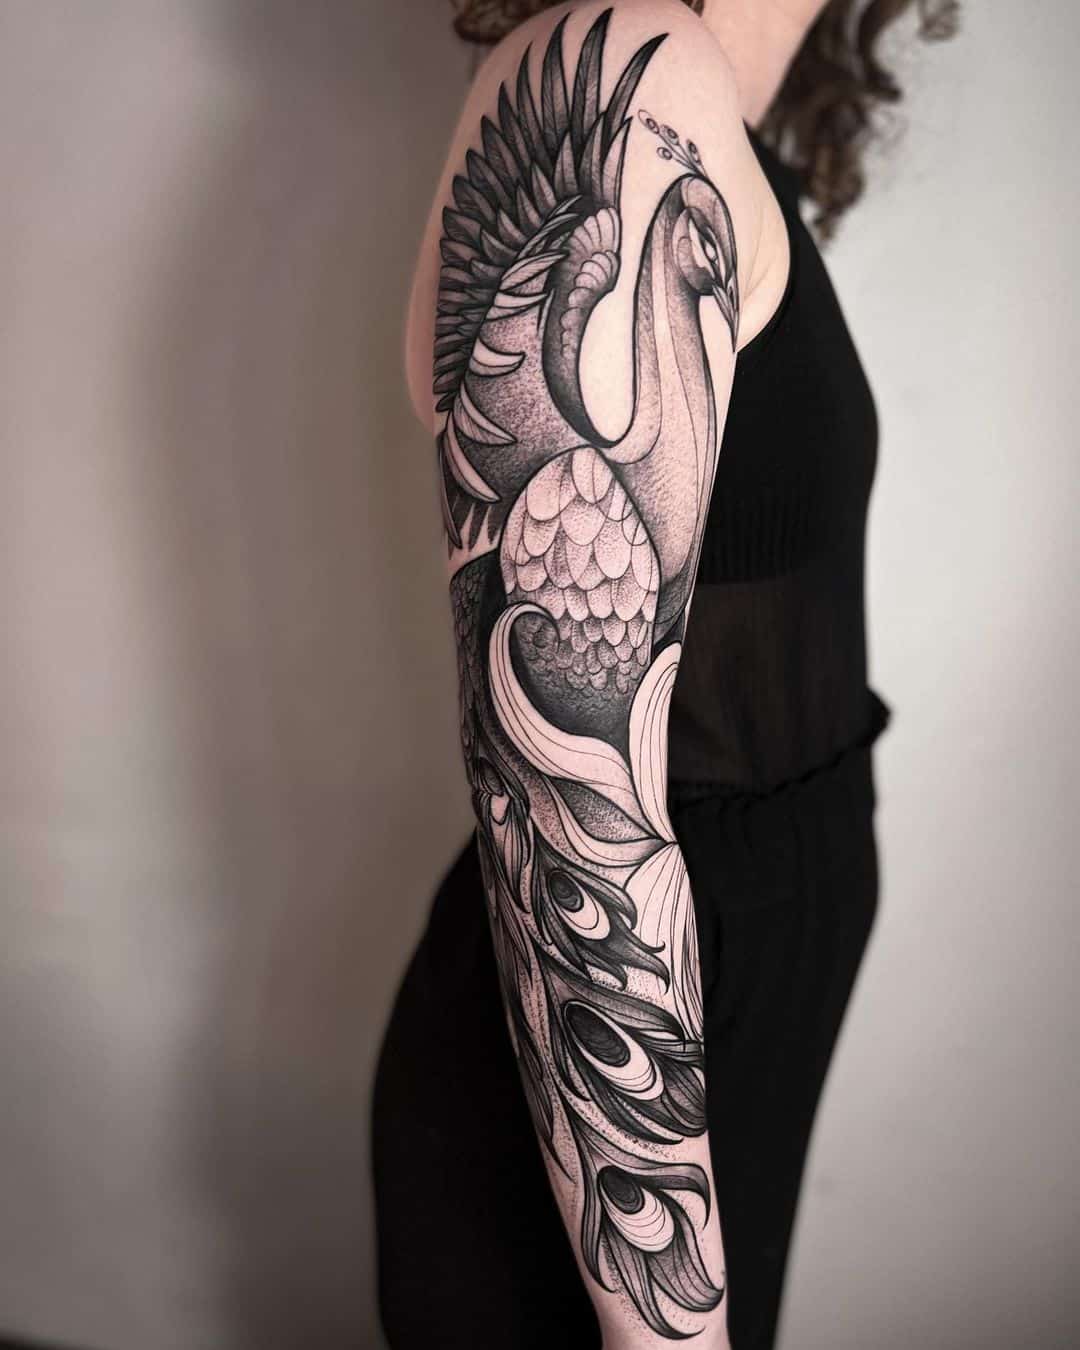 Black and grey Peacock Tattoo